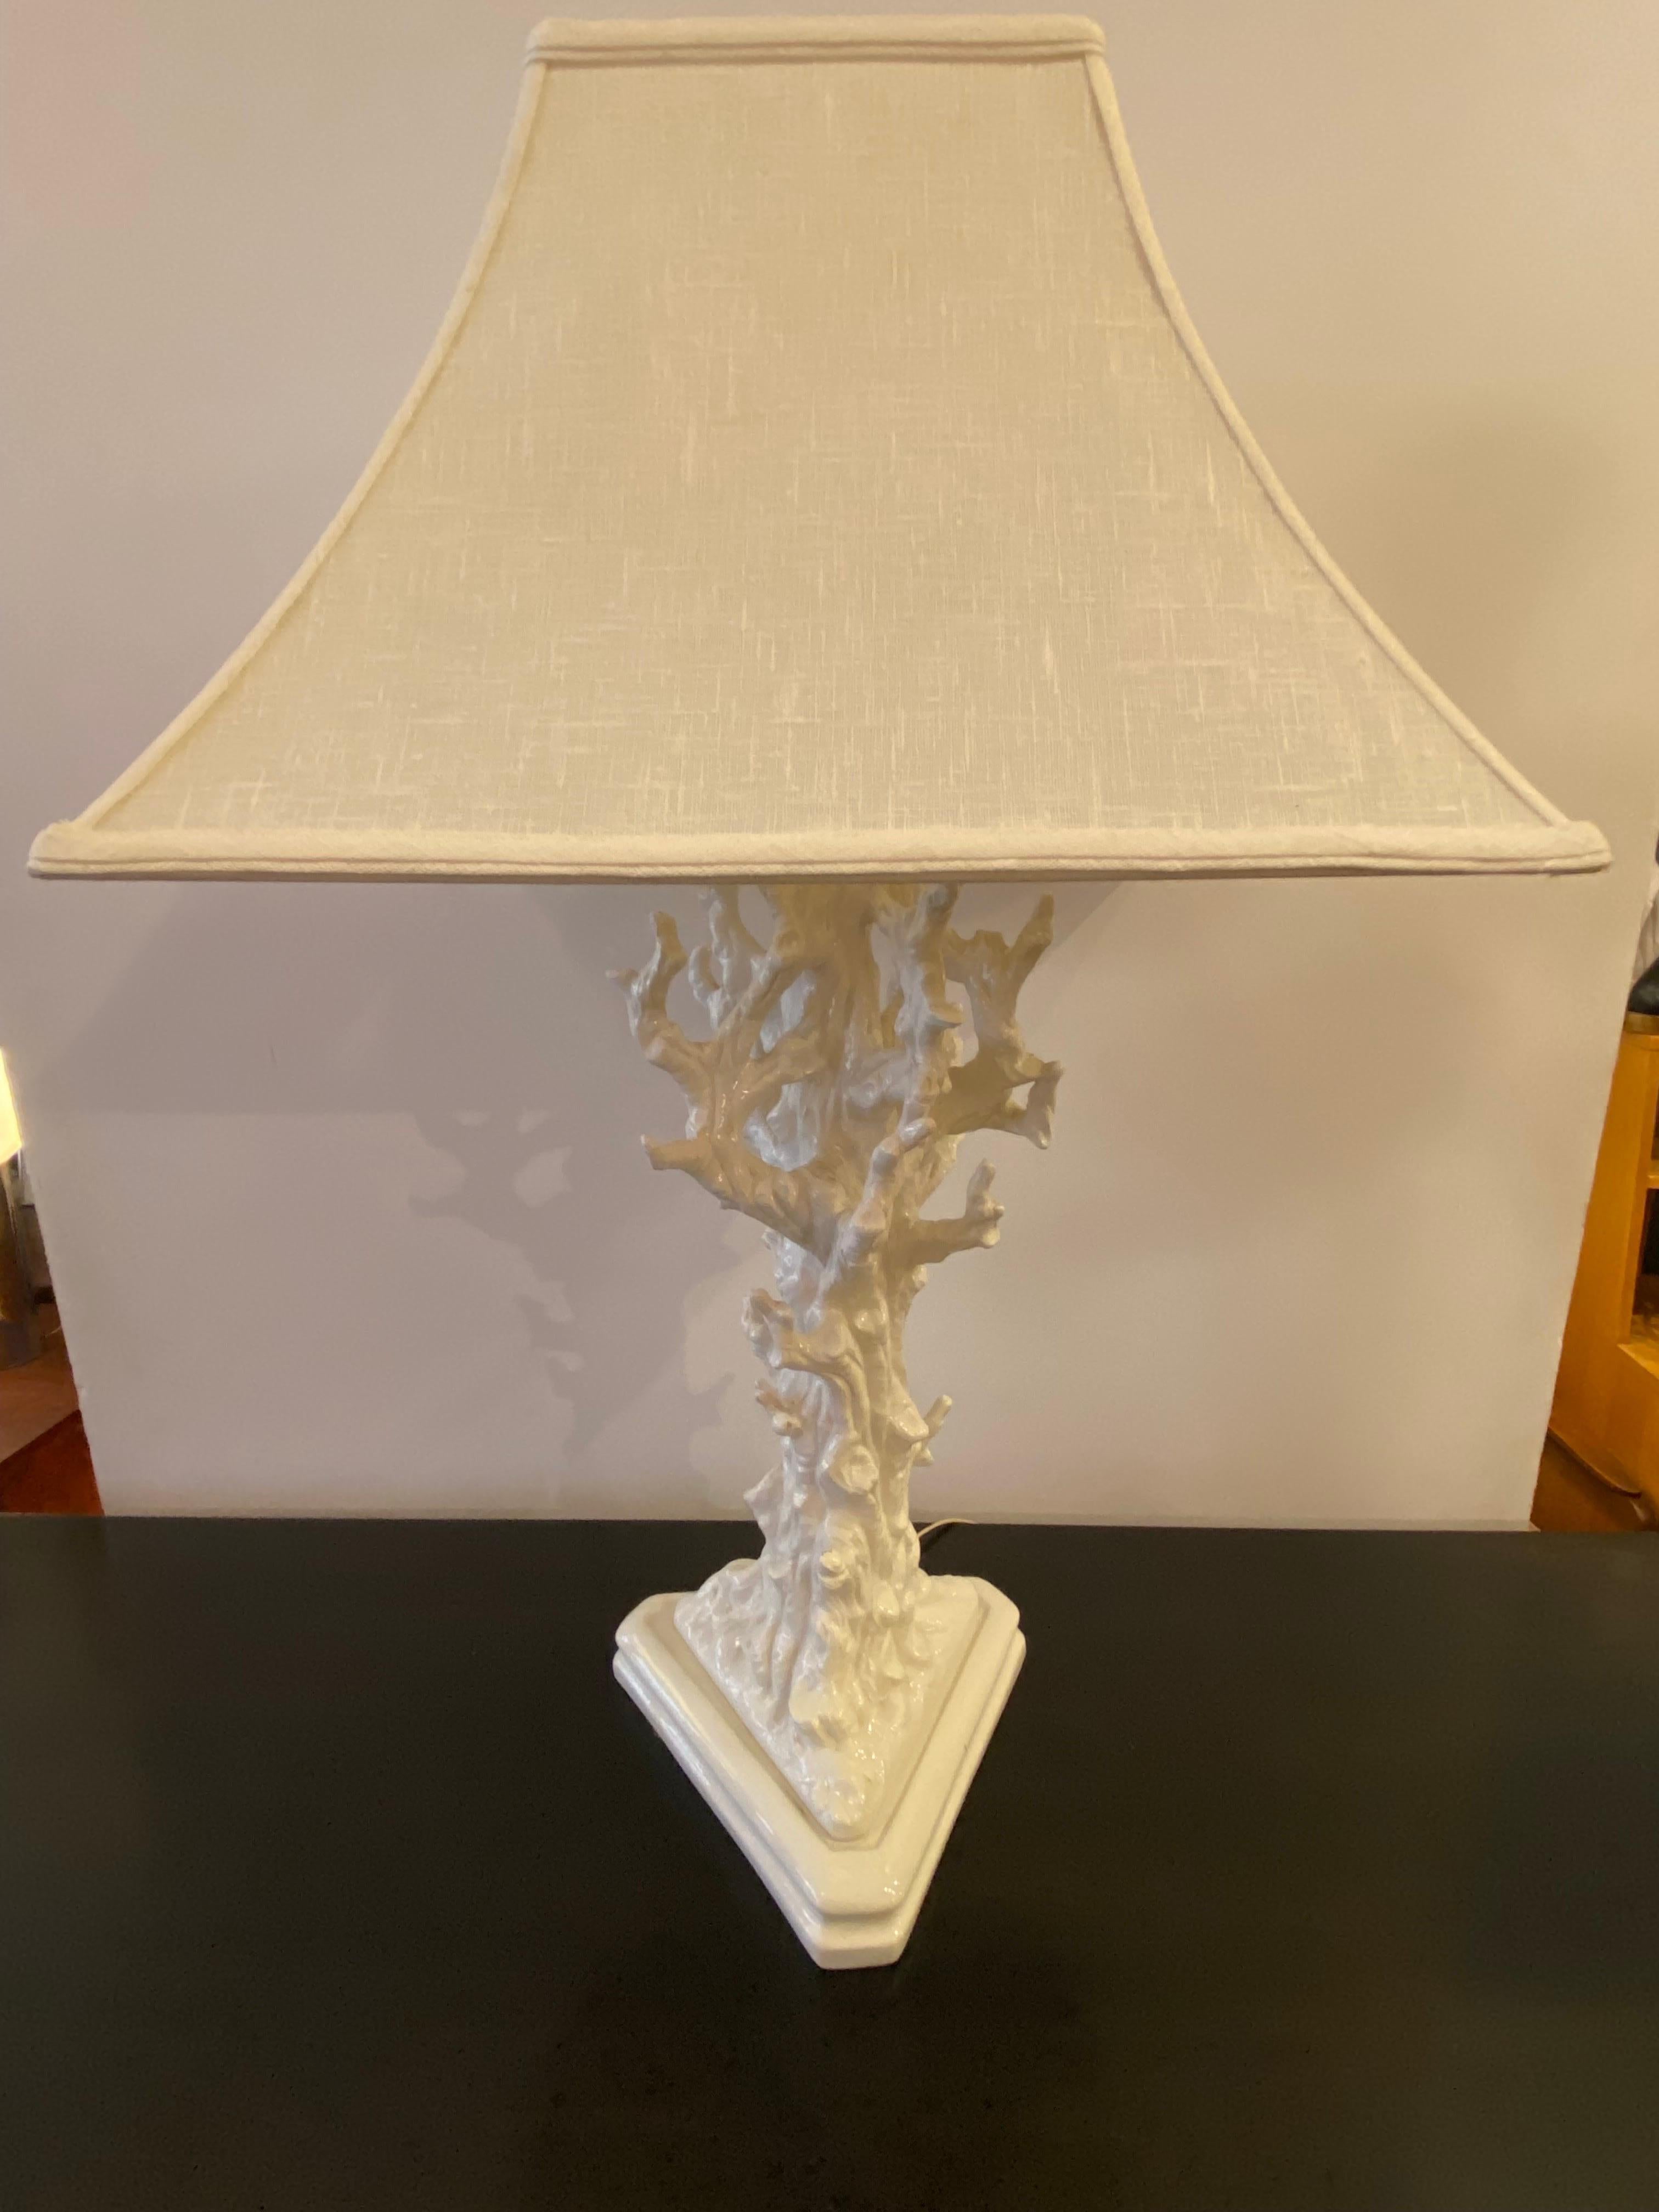 Italian Faux Bois ceramic tree branch table lamp. Triangular base supports the lamp. In very nice shape with just a couple nicks to glaze, no signs of repairs to branches! 3 way switch gives plenty of light! White glaze, lampshade included if